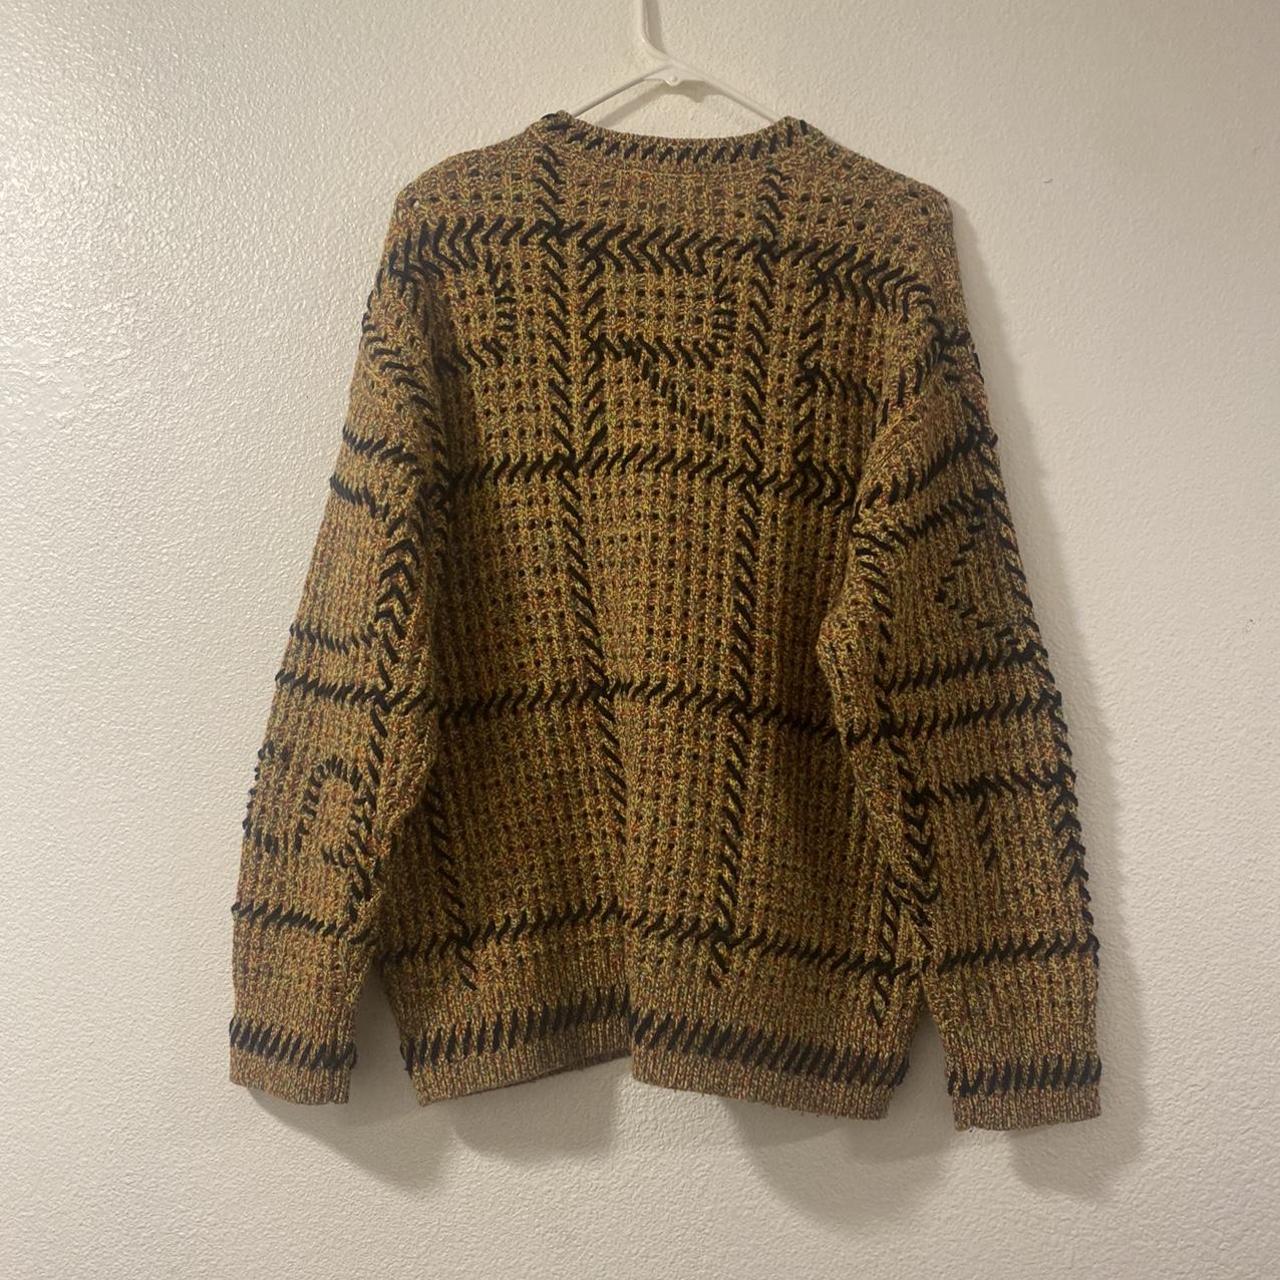 Supreme Quilt Stitch Sweater yellow only wore once... - Depop